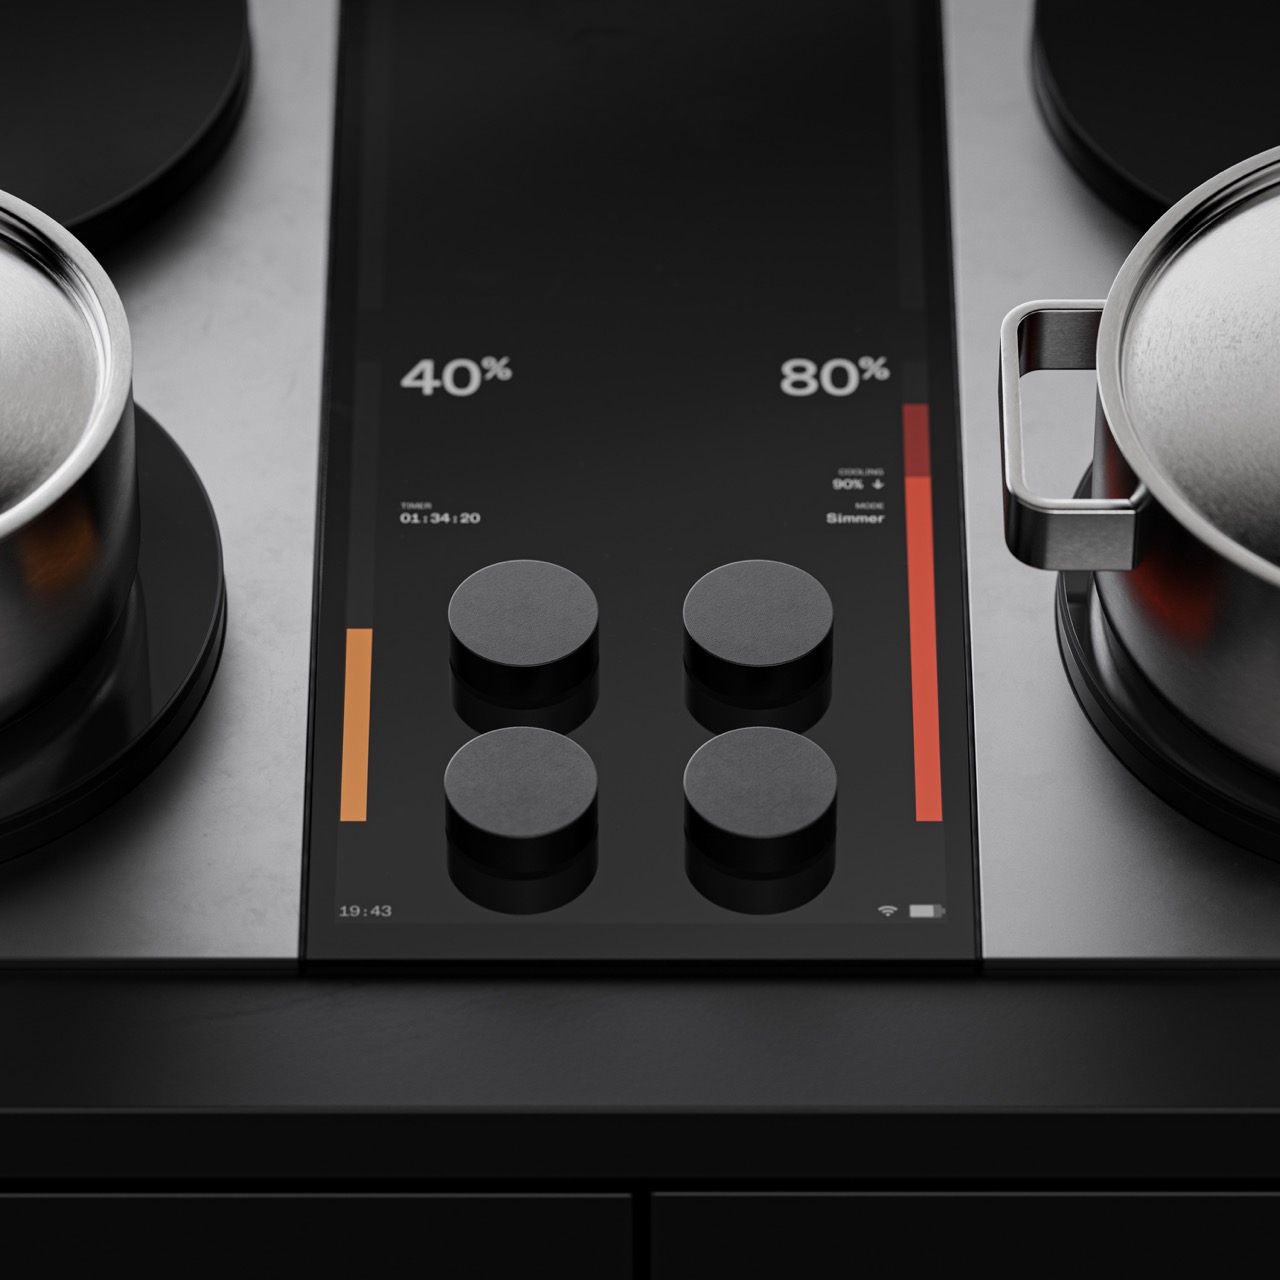 større blæk apologi Induction cooking heats up with a $20M cash injection for Impulse |  TechCrunch